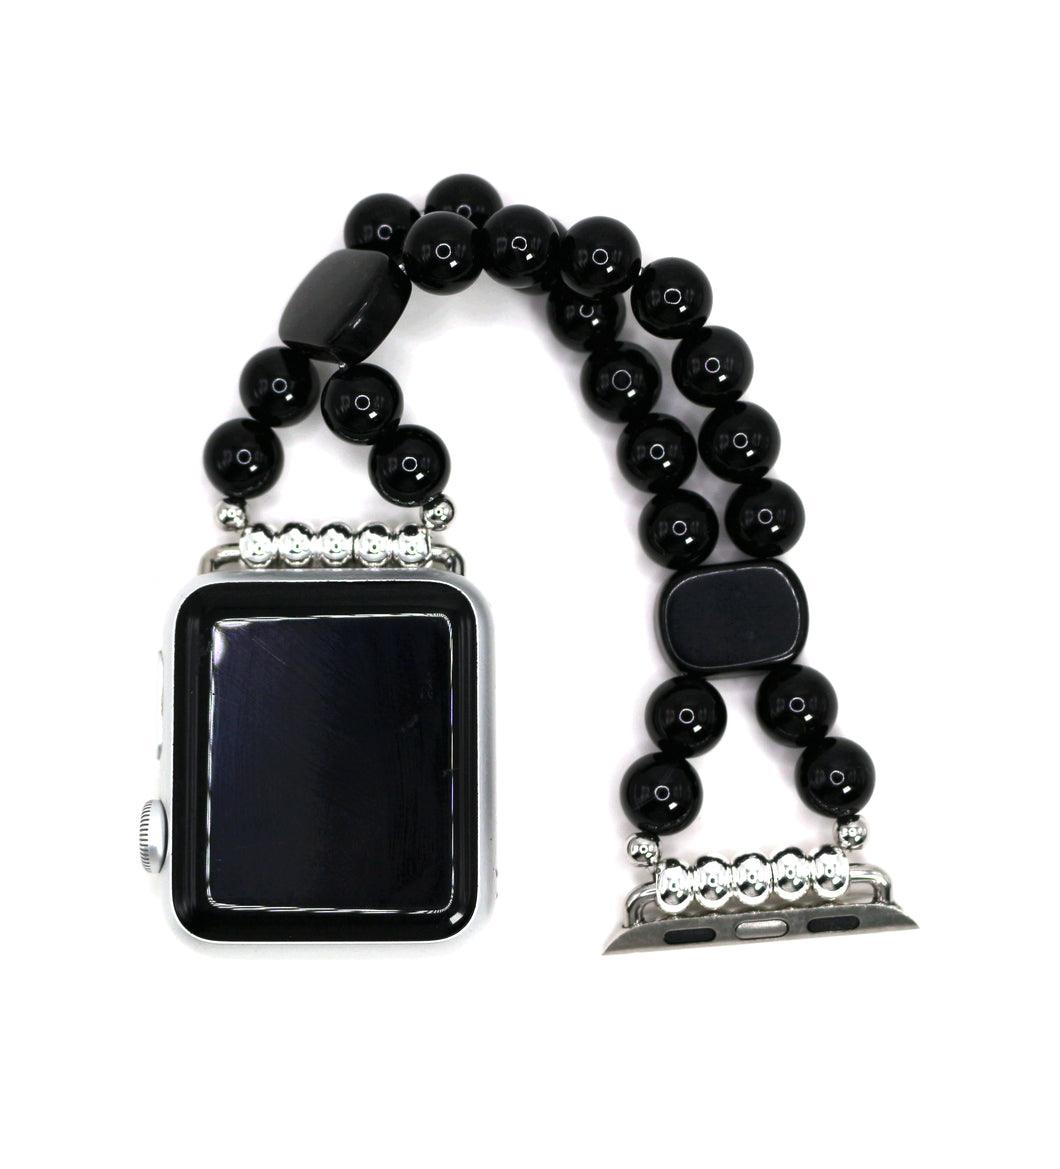 Black Onyx and Black Obsidian Bracelet Watch Band for Apple Watch